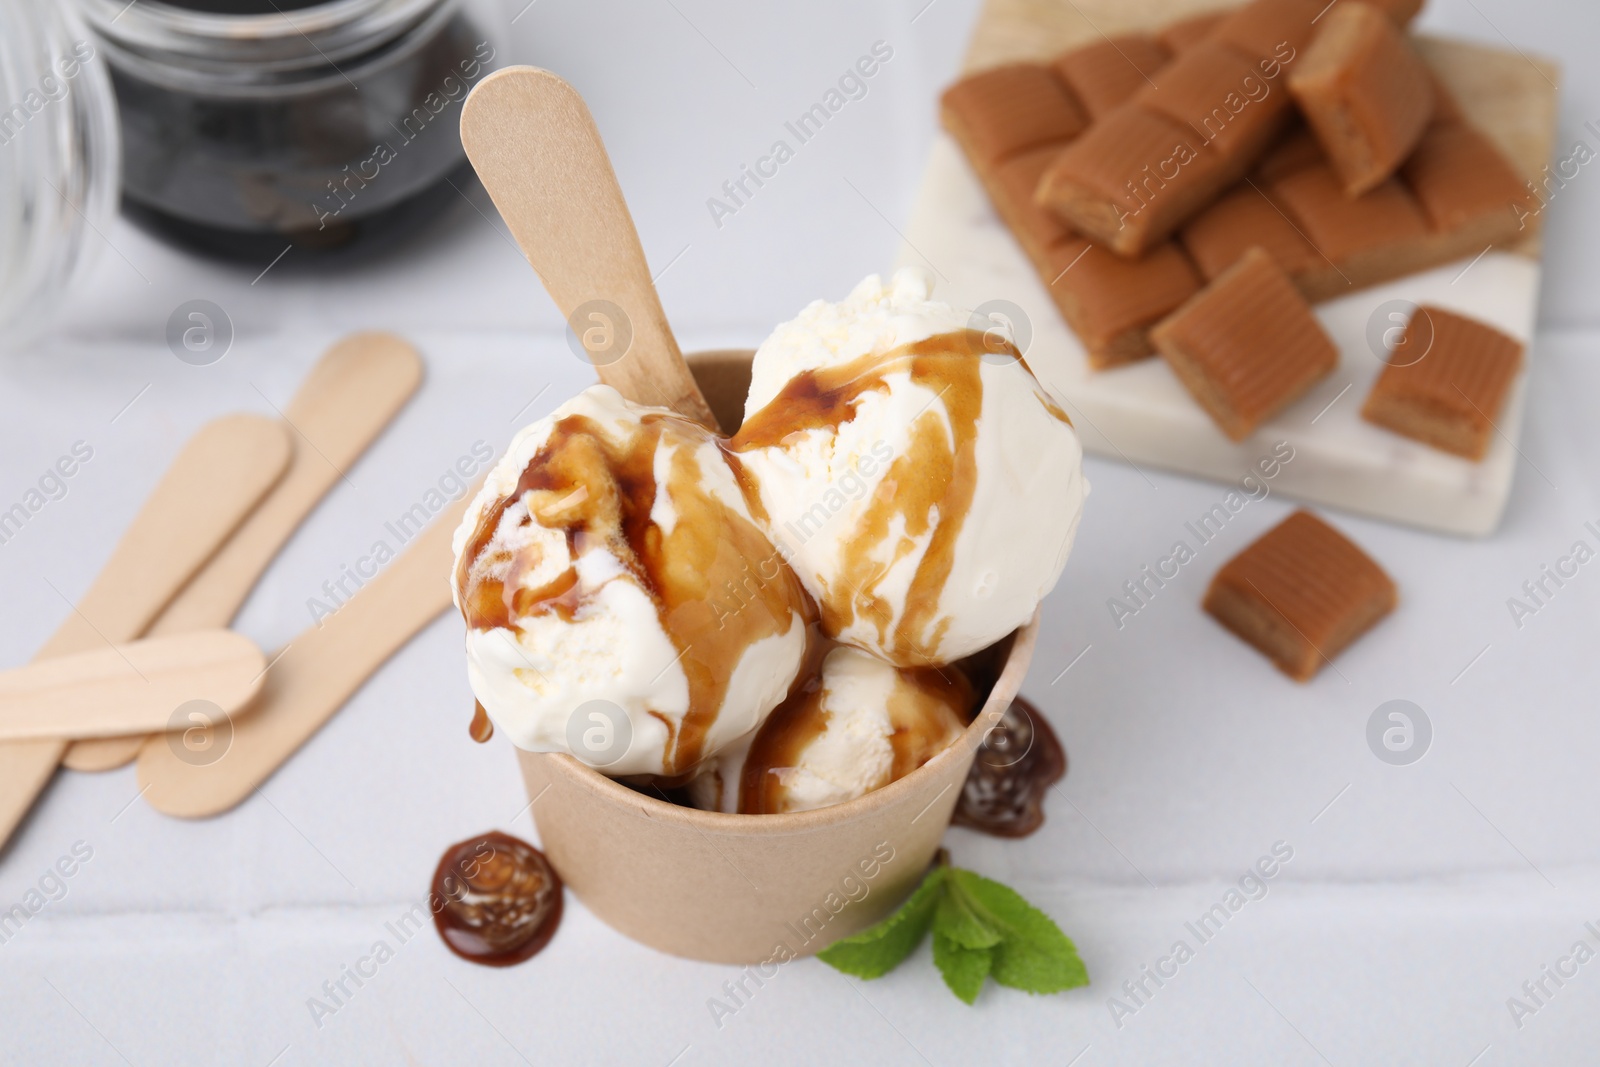 Photo of Scoops of ice cream with caramel sauce in paper cup on white tiled table